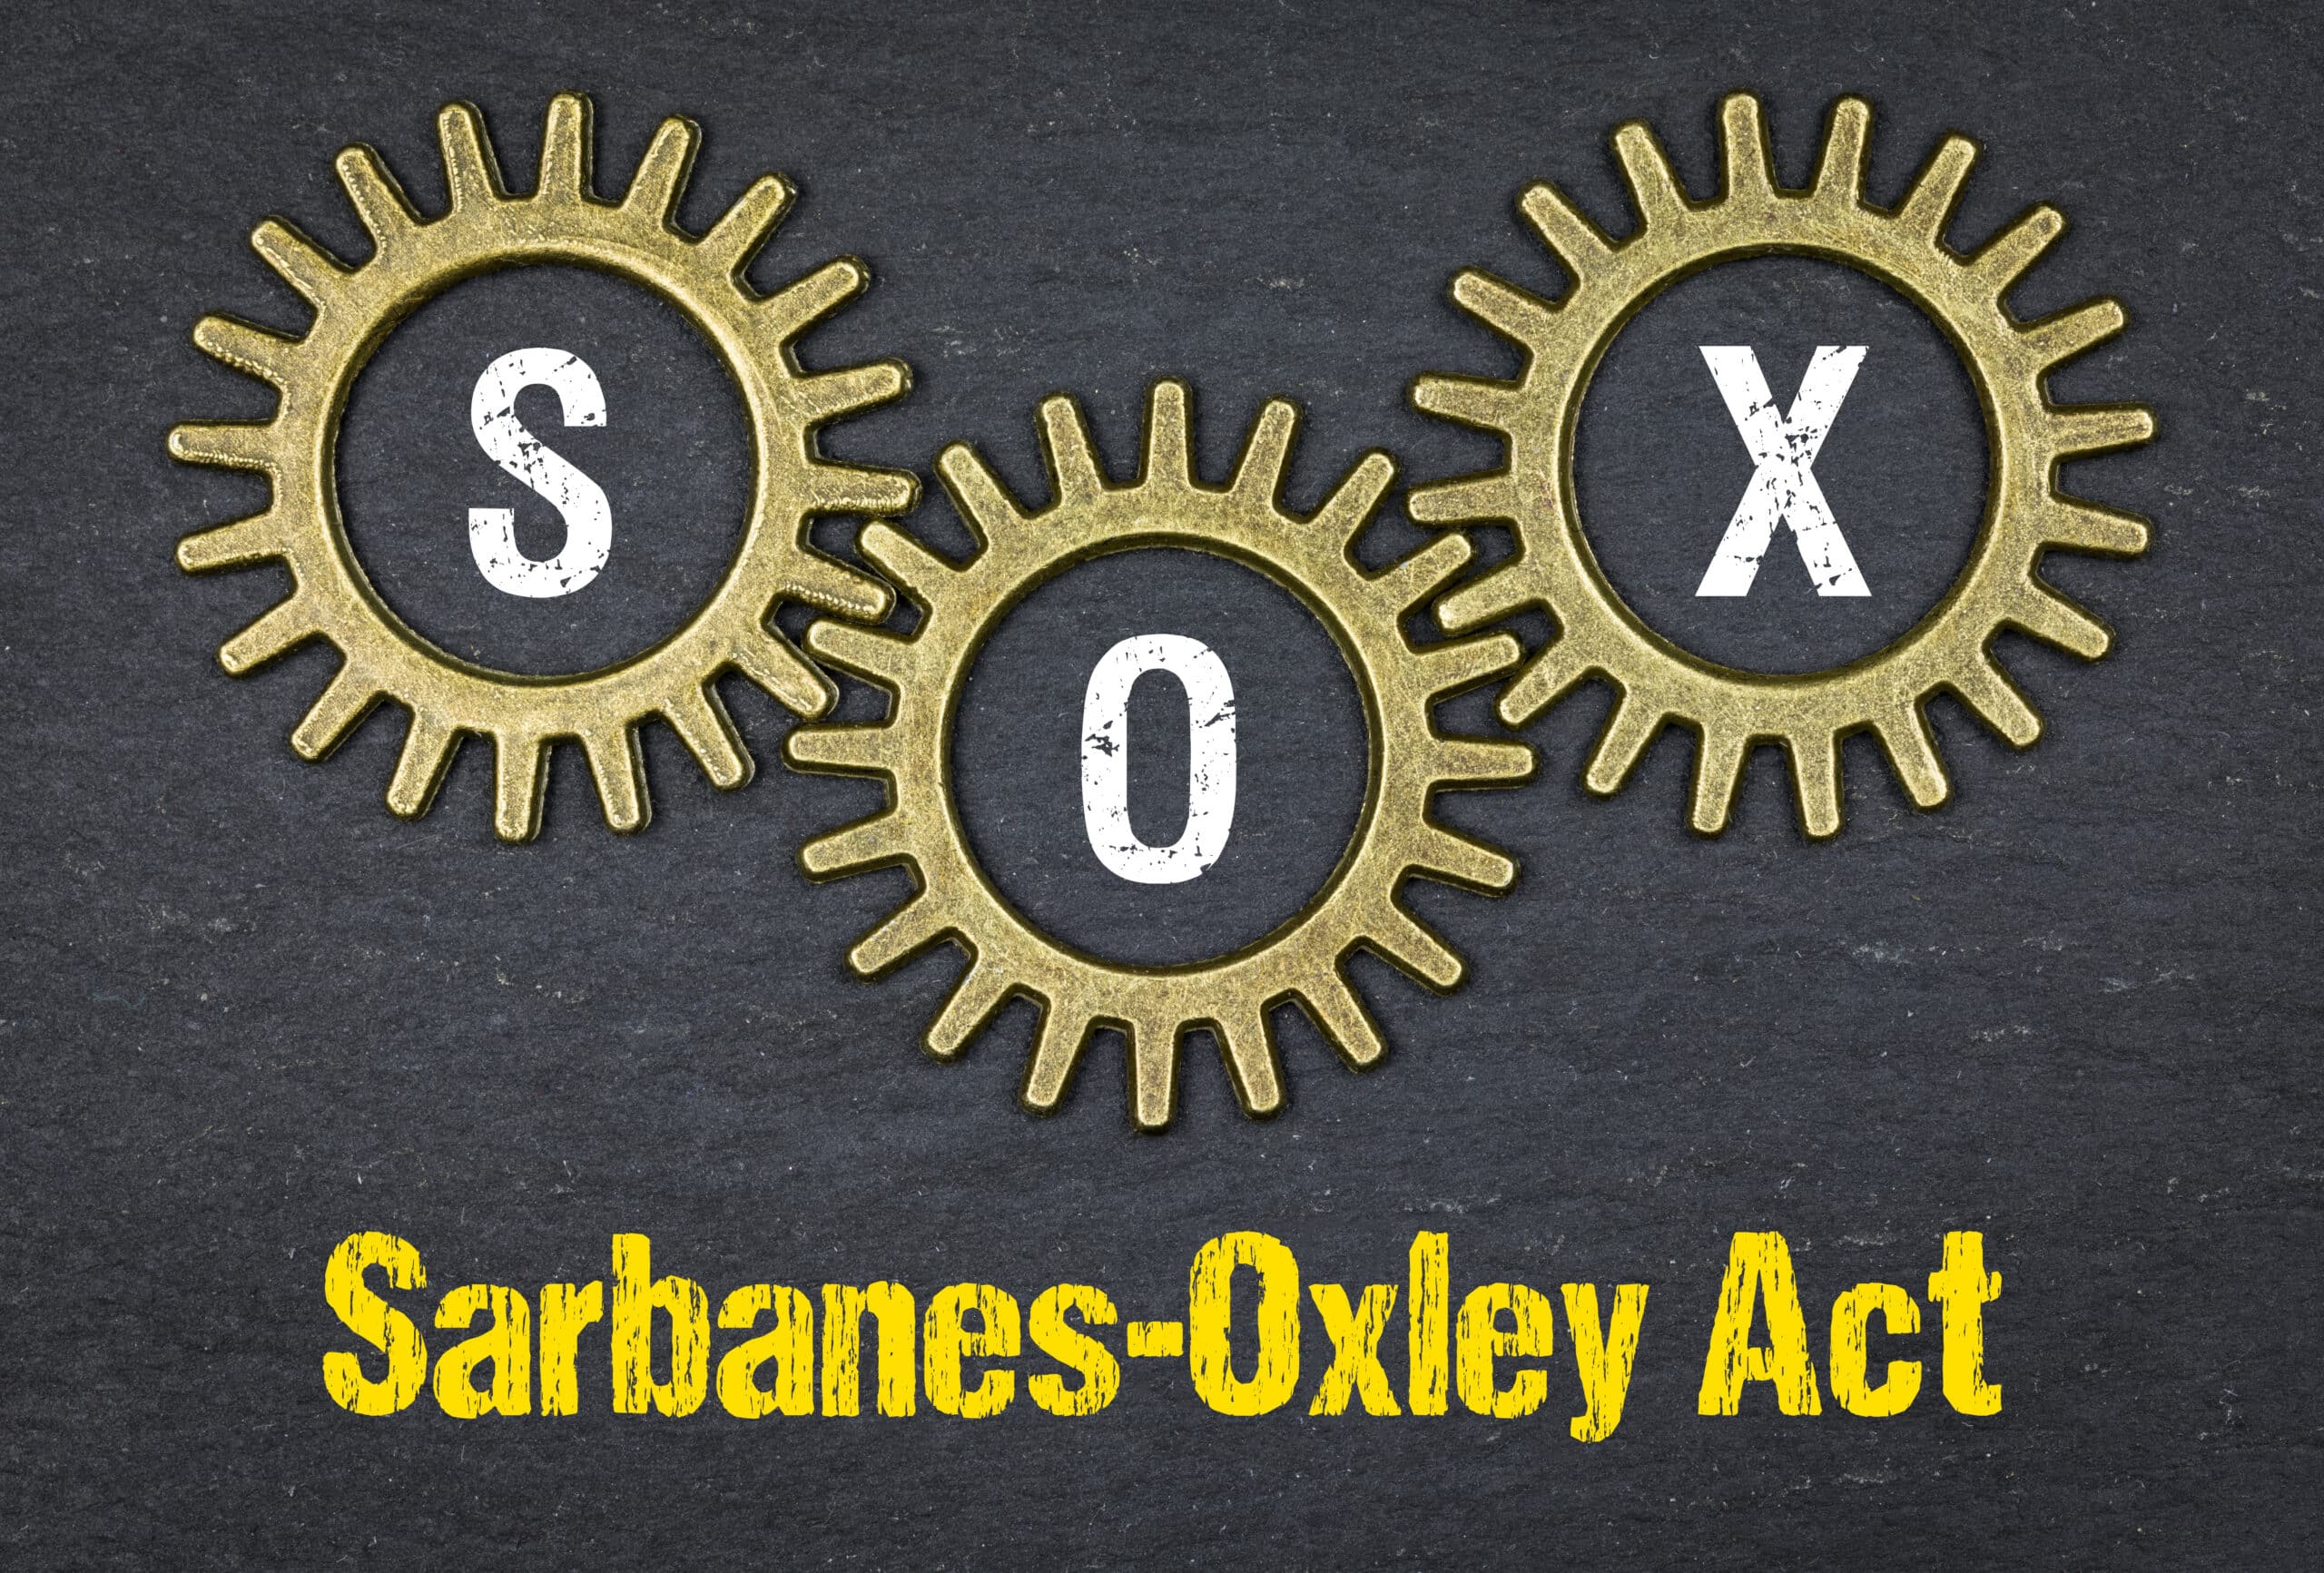 Three interlocking gear wheels on a black background with the words "Sarbanes-Oxley Act" representing automation for SOX compliance best practices for Salesforce releases